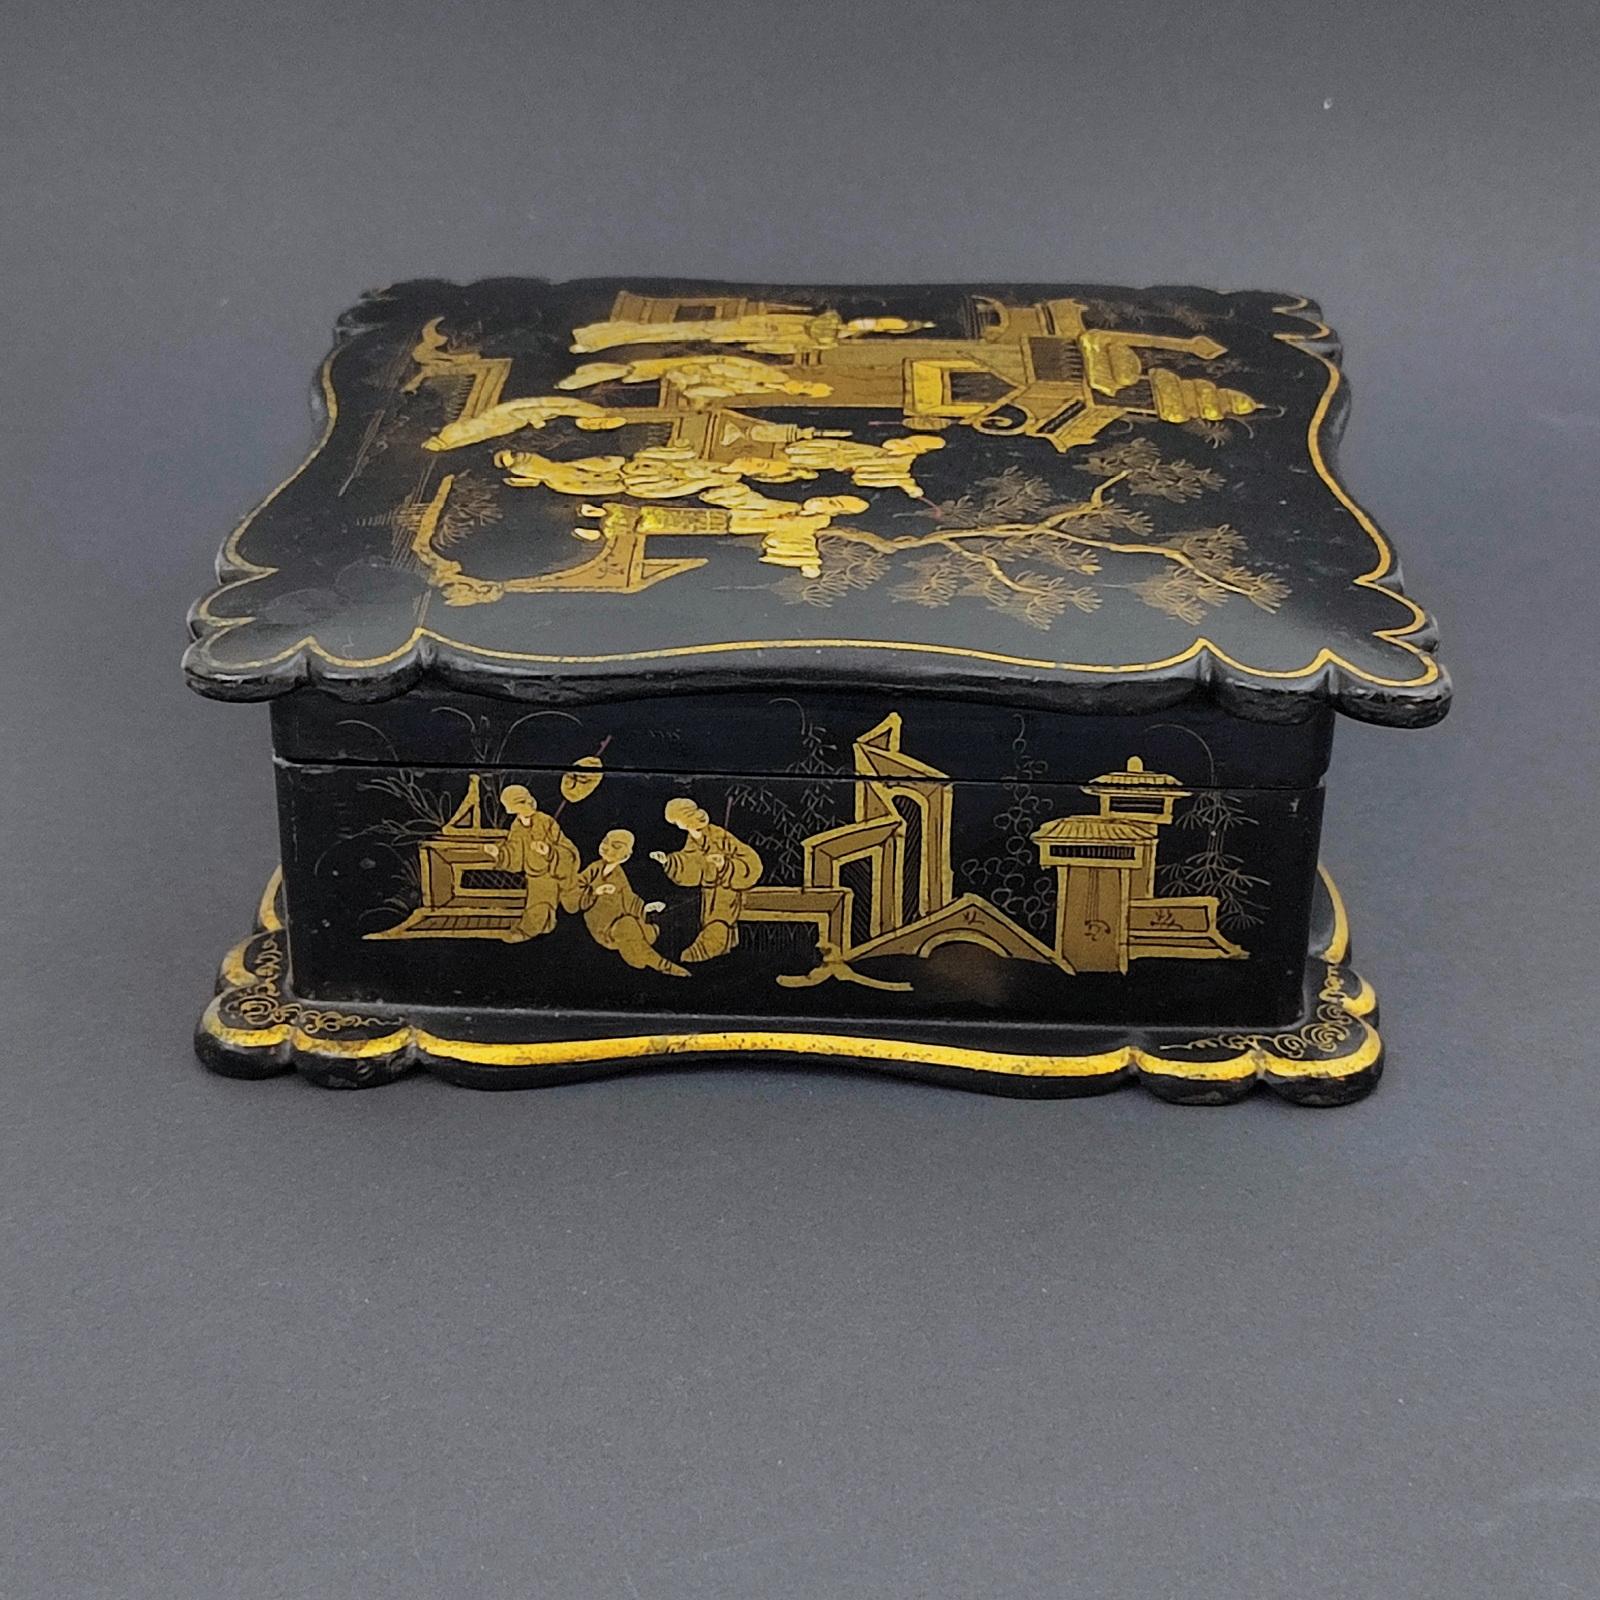 French Napoleon III Jewelry Box in Black Lacquer with Asian Decor, 19th Century  For Sale 3